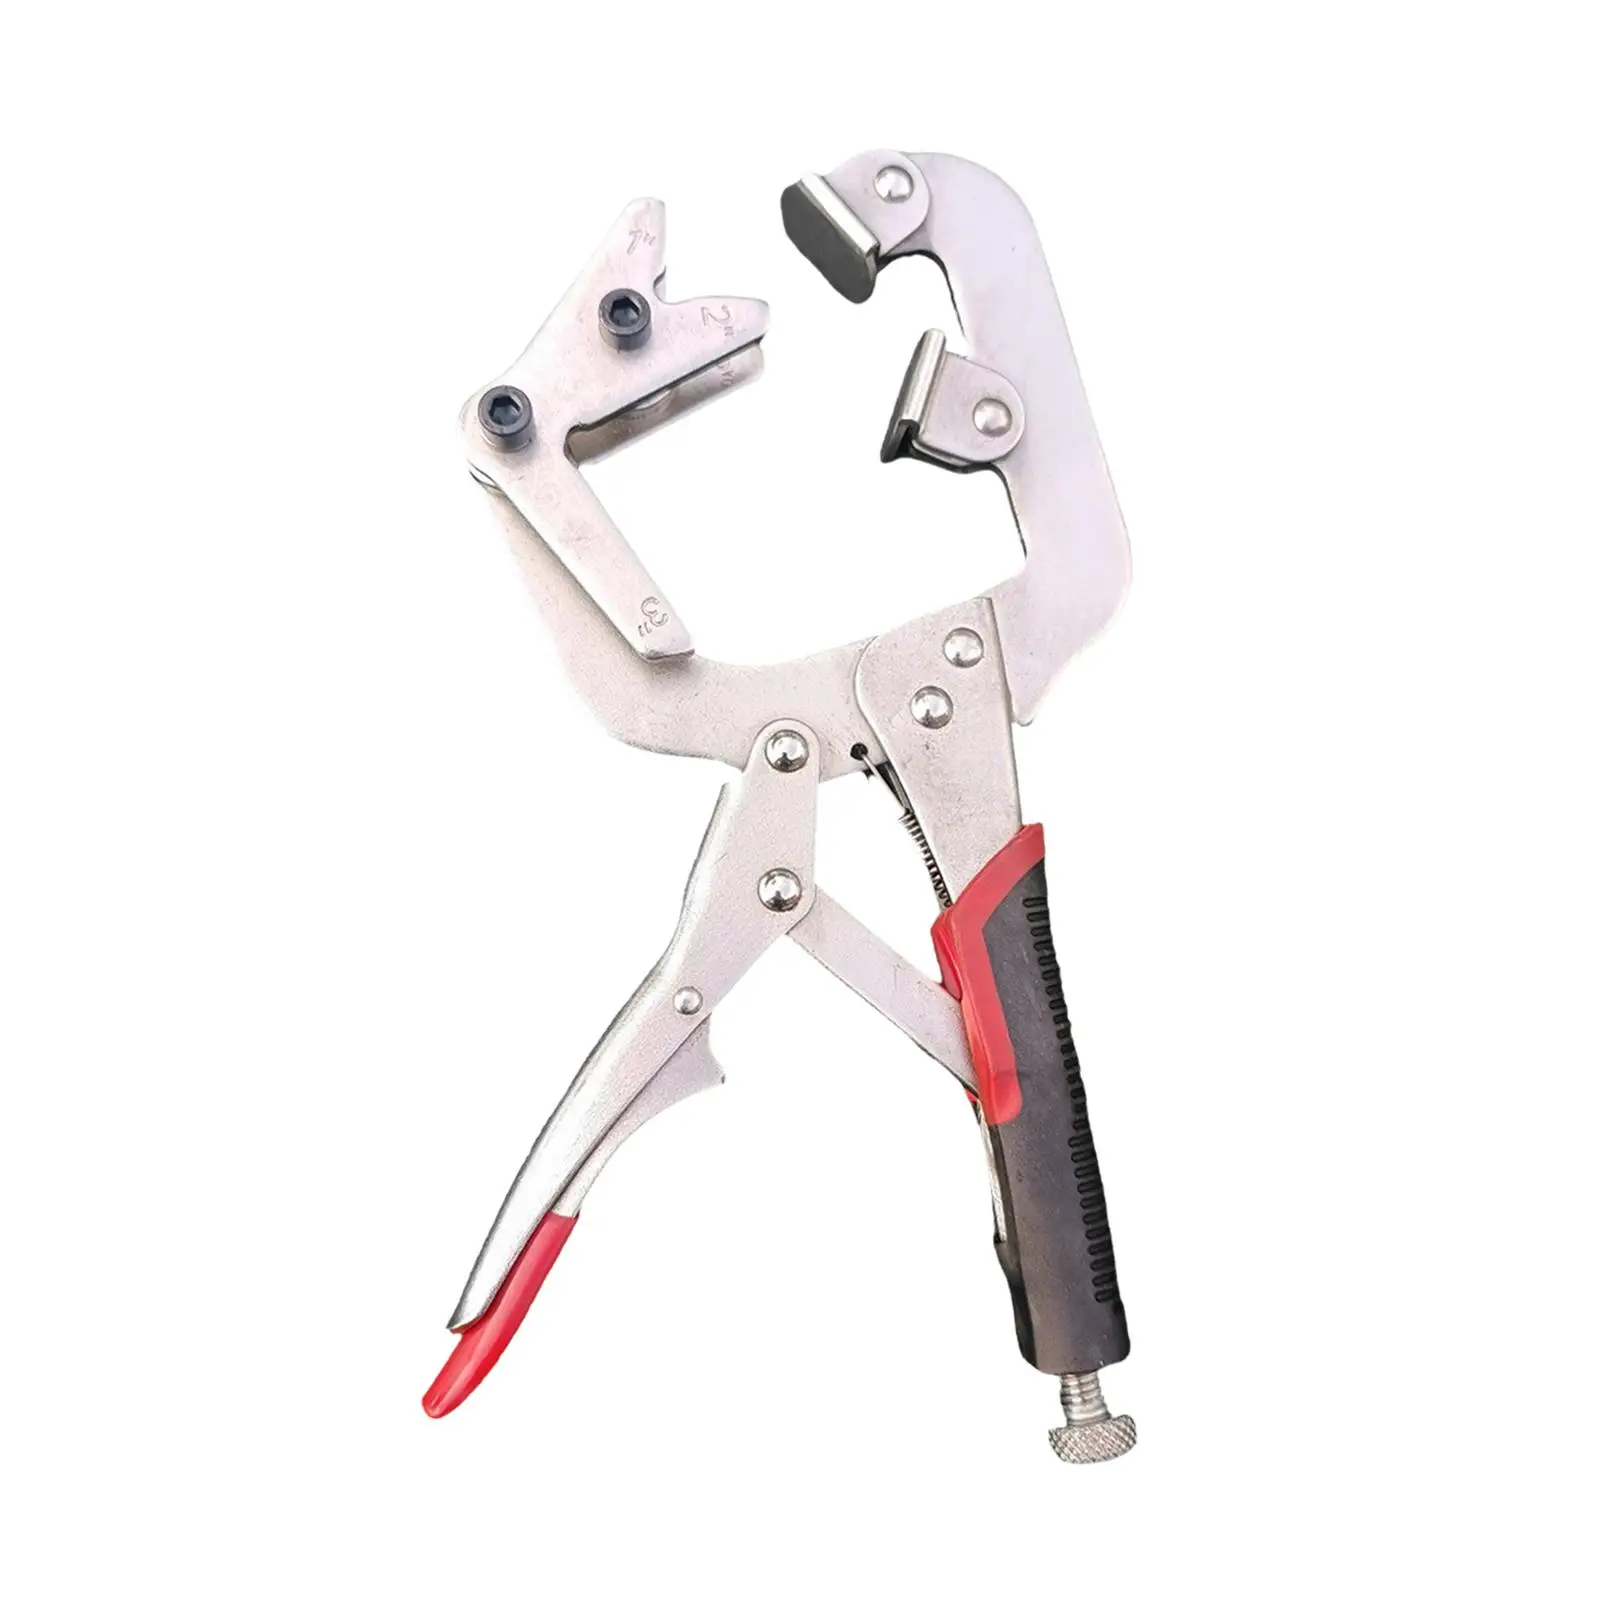 Locking Clamps 10 inch Adjustable Heavy Duty Welding Pipe Plier Clamp Set Clamp Locking Pliers for Auto Woodwork Home Farm